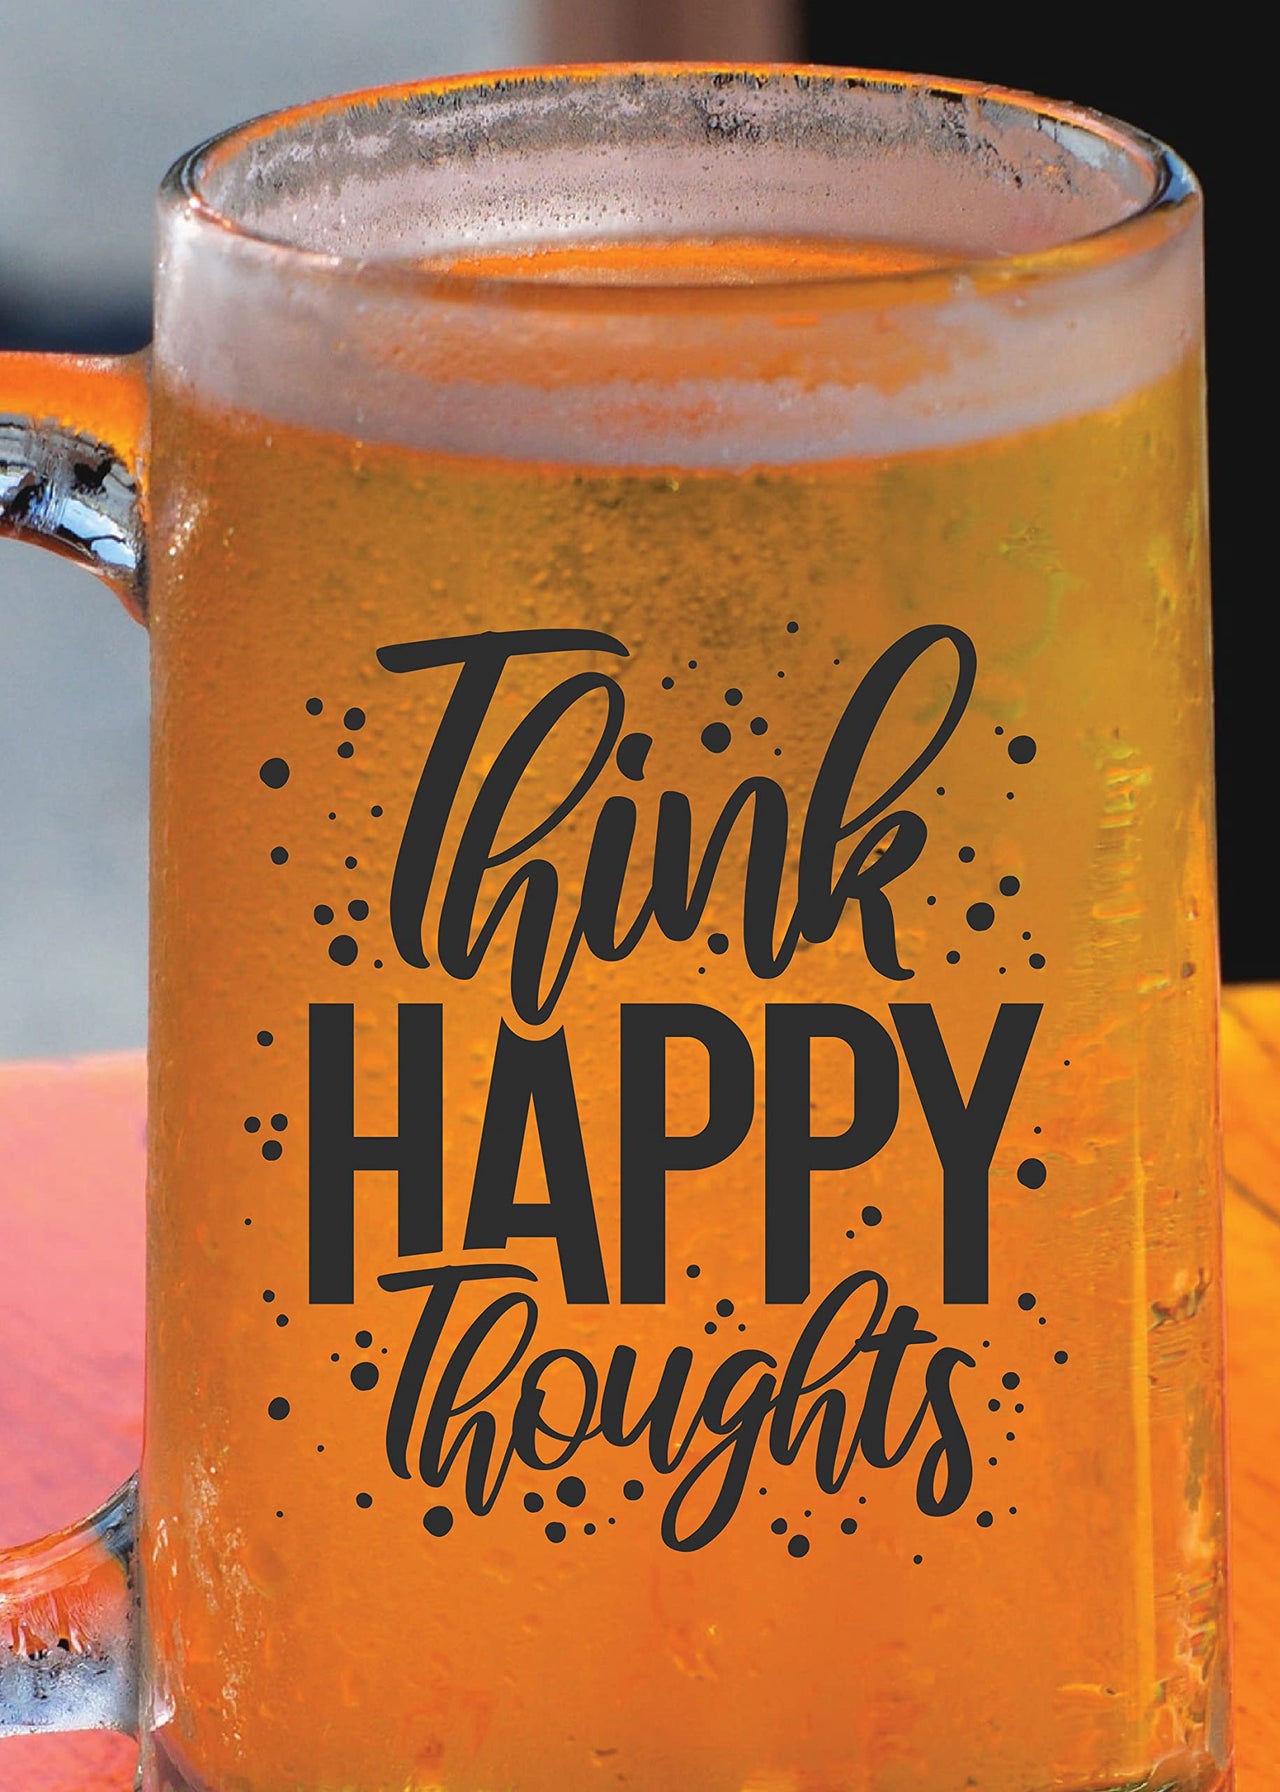 Think Happy Thoughts - Beer Mug - 1 Piece, Clear, 500 ml - Transparent Glass Beer Mug - Printed Beer Mug with Handle Gift for Men, Dad